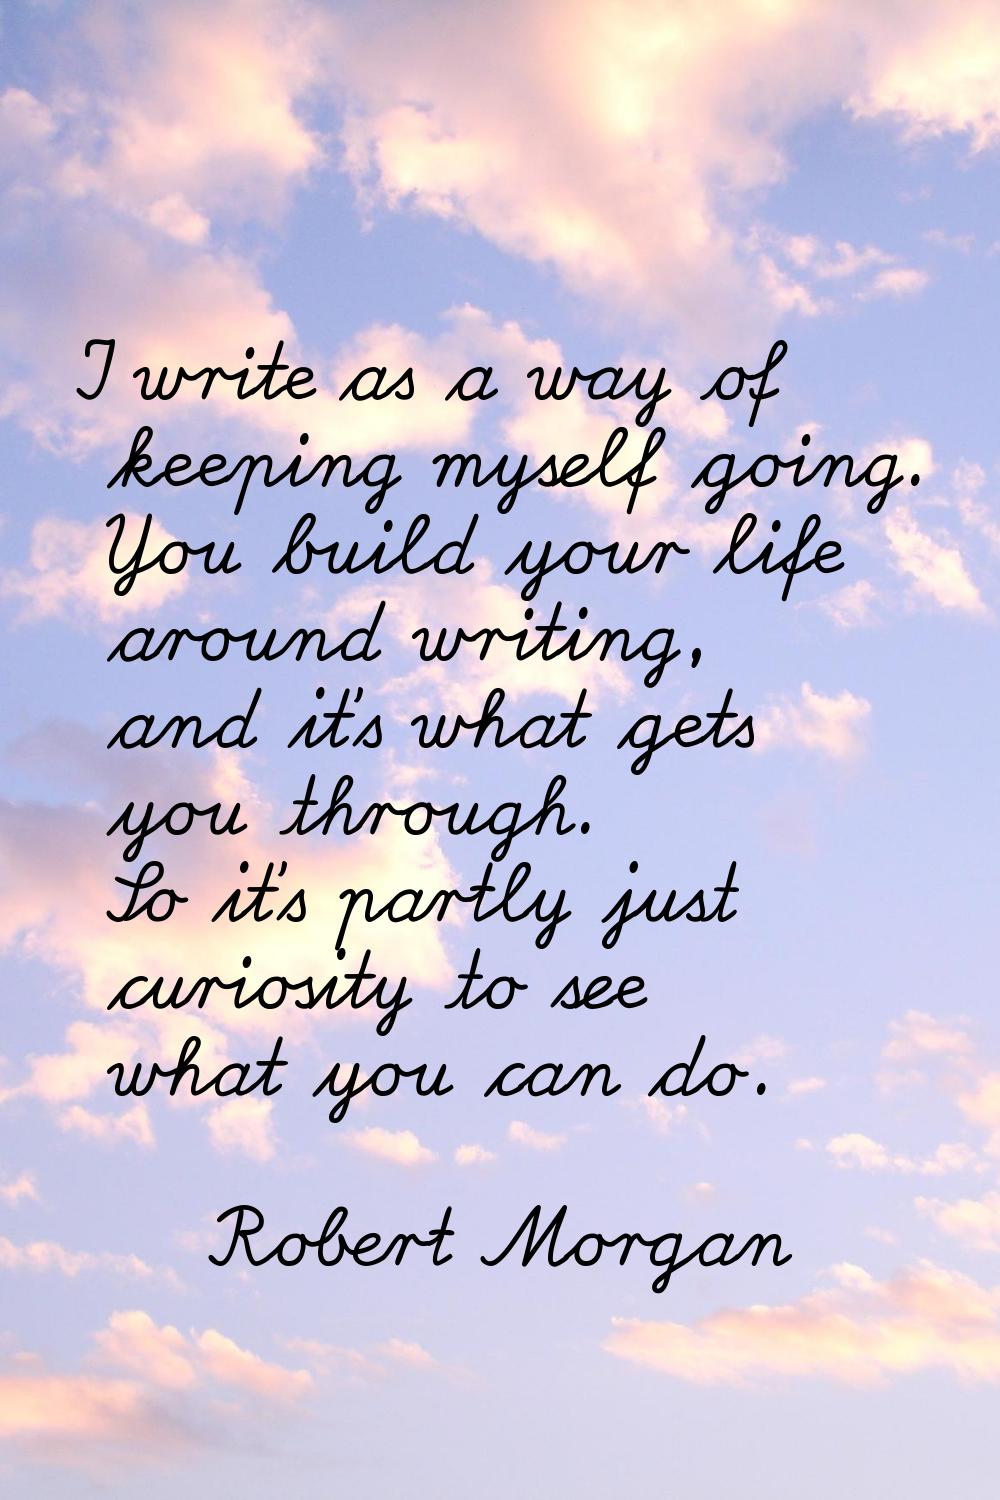 I write as a way of keeping myself going. You build your life around writing, and it's what gets yo